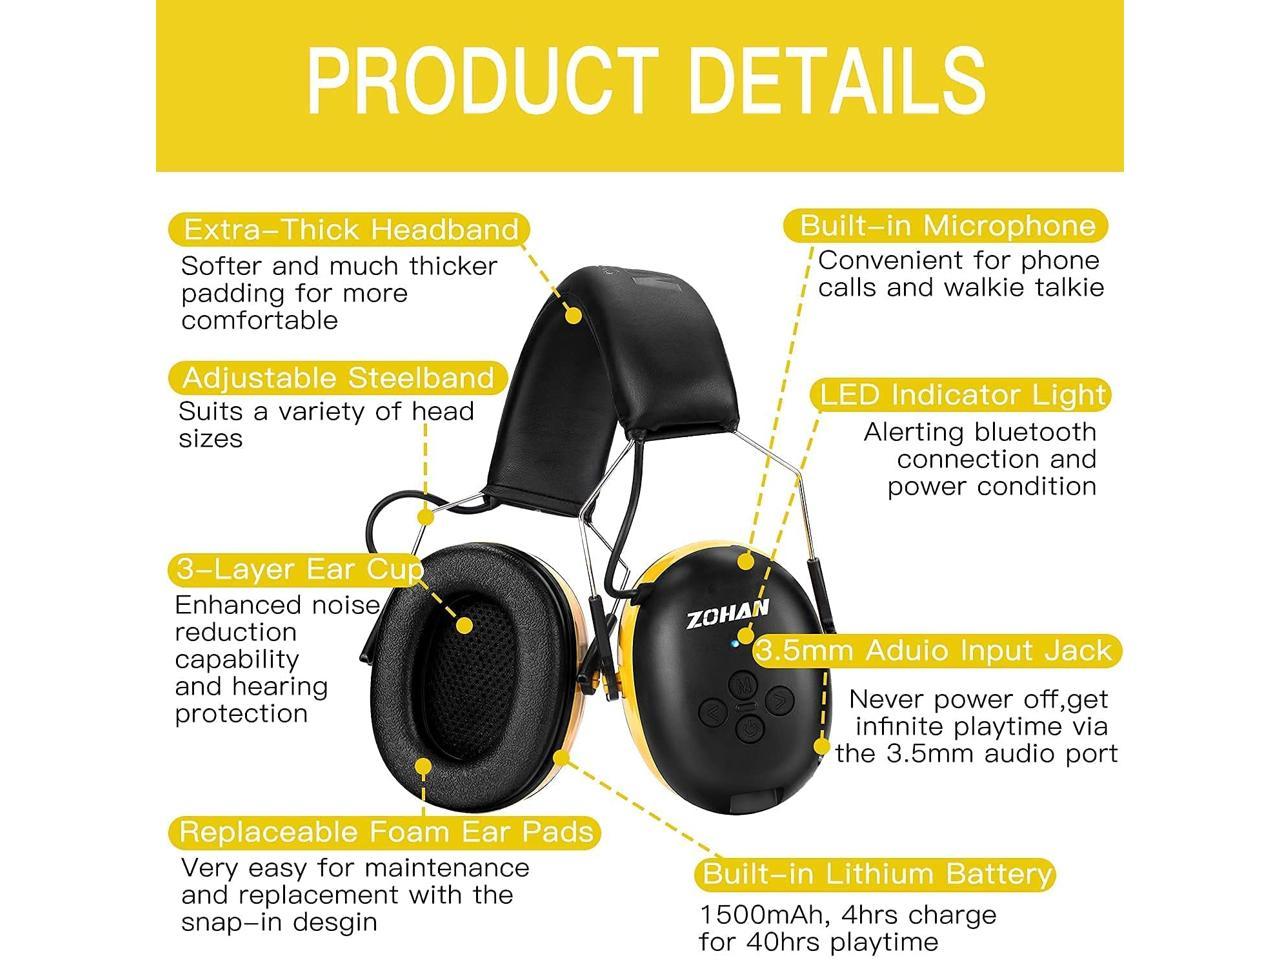 ZOHAN EM042 AM/FM Radio Headphone with Digital Display, Ear Protection for  Lawn Mowing&ZOHAN EM037 Hearing Protection with Bluetooth, NRR 25dB, 